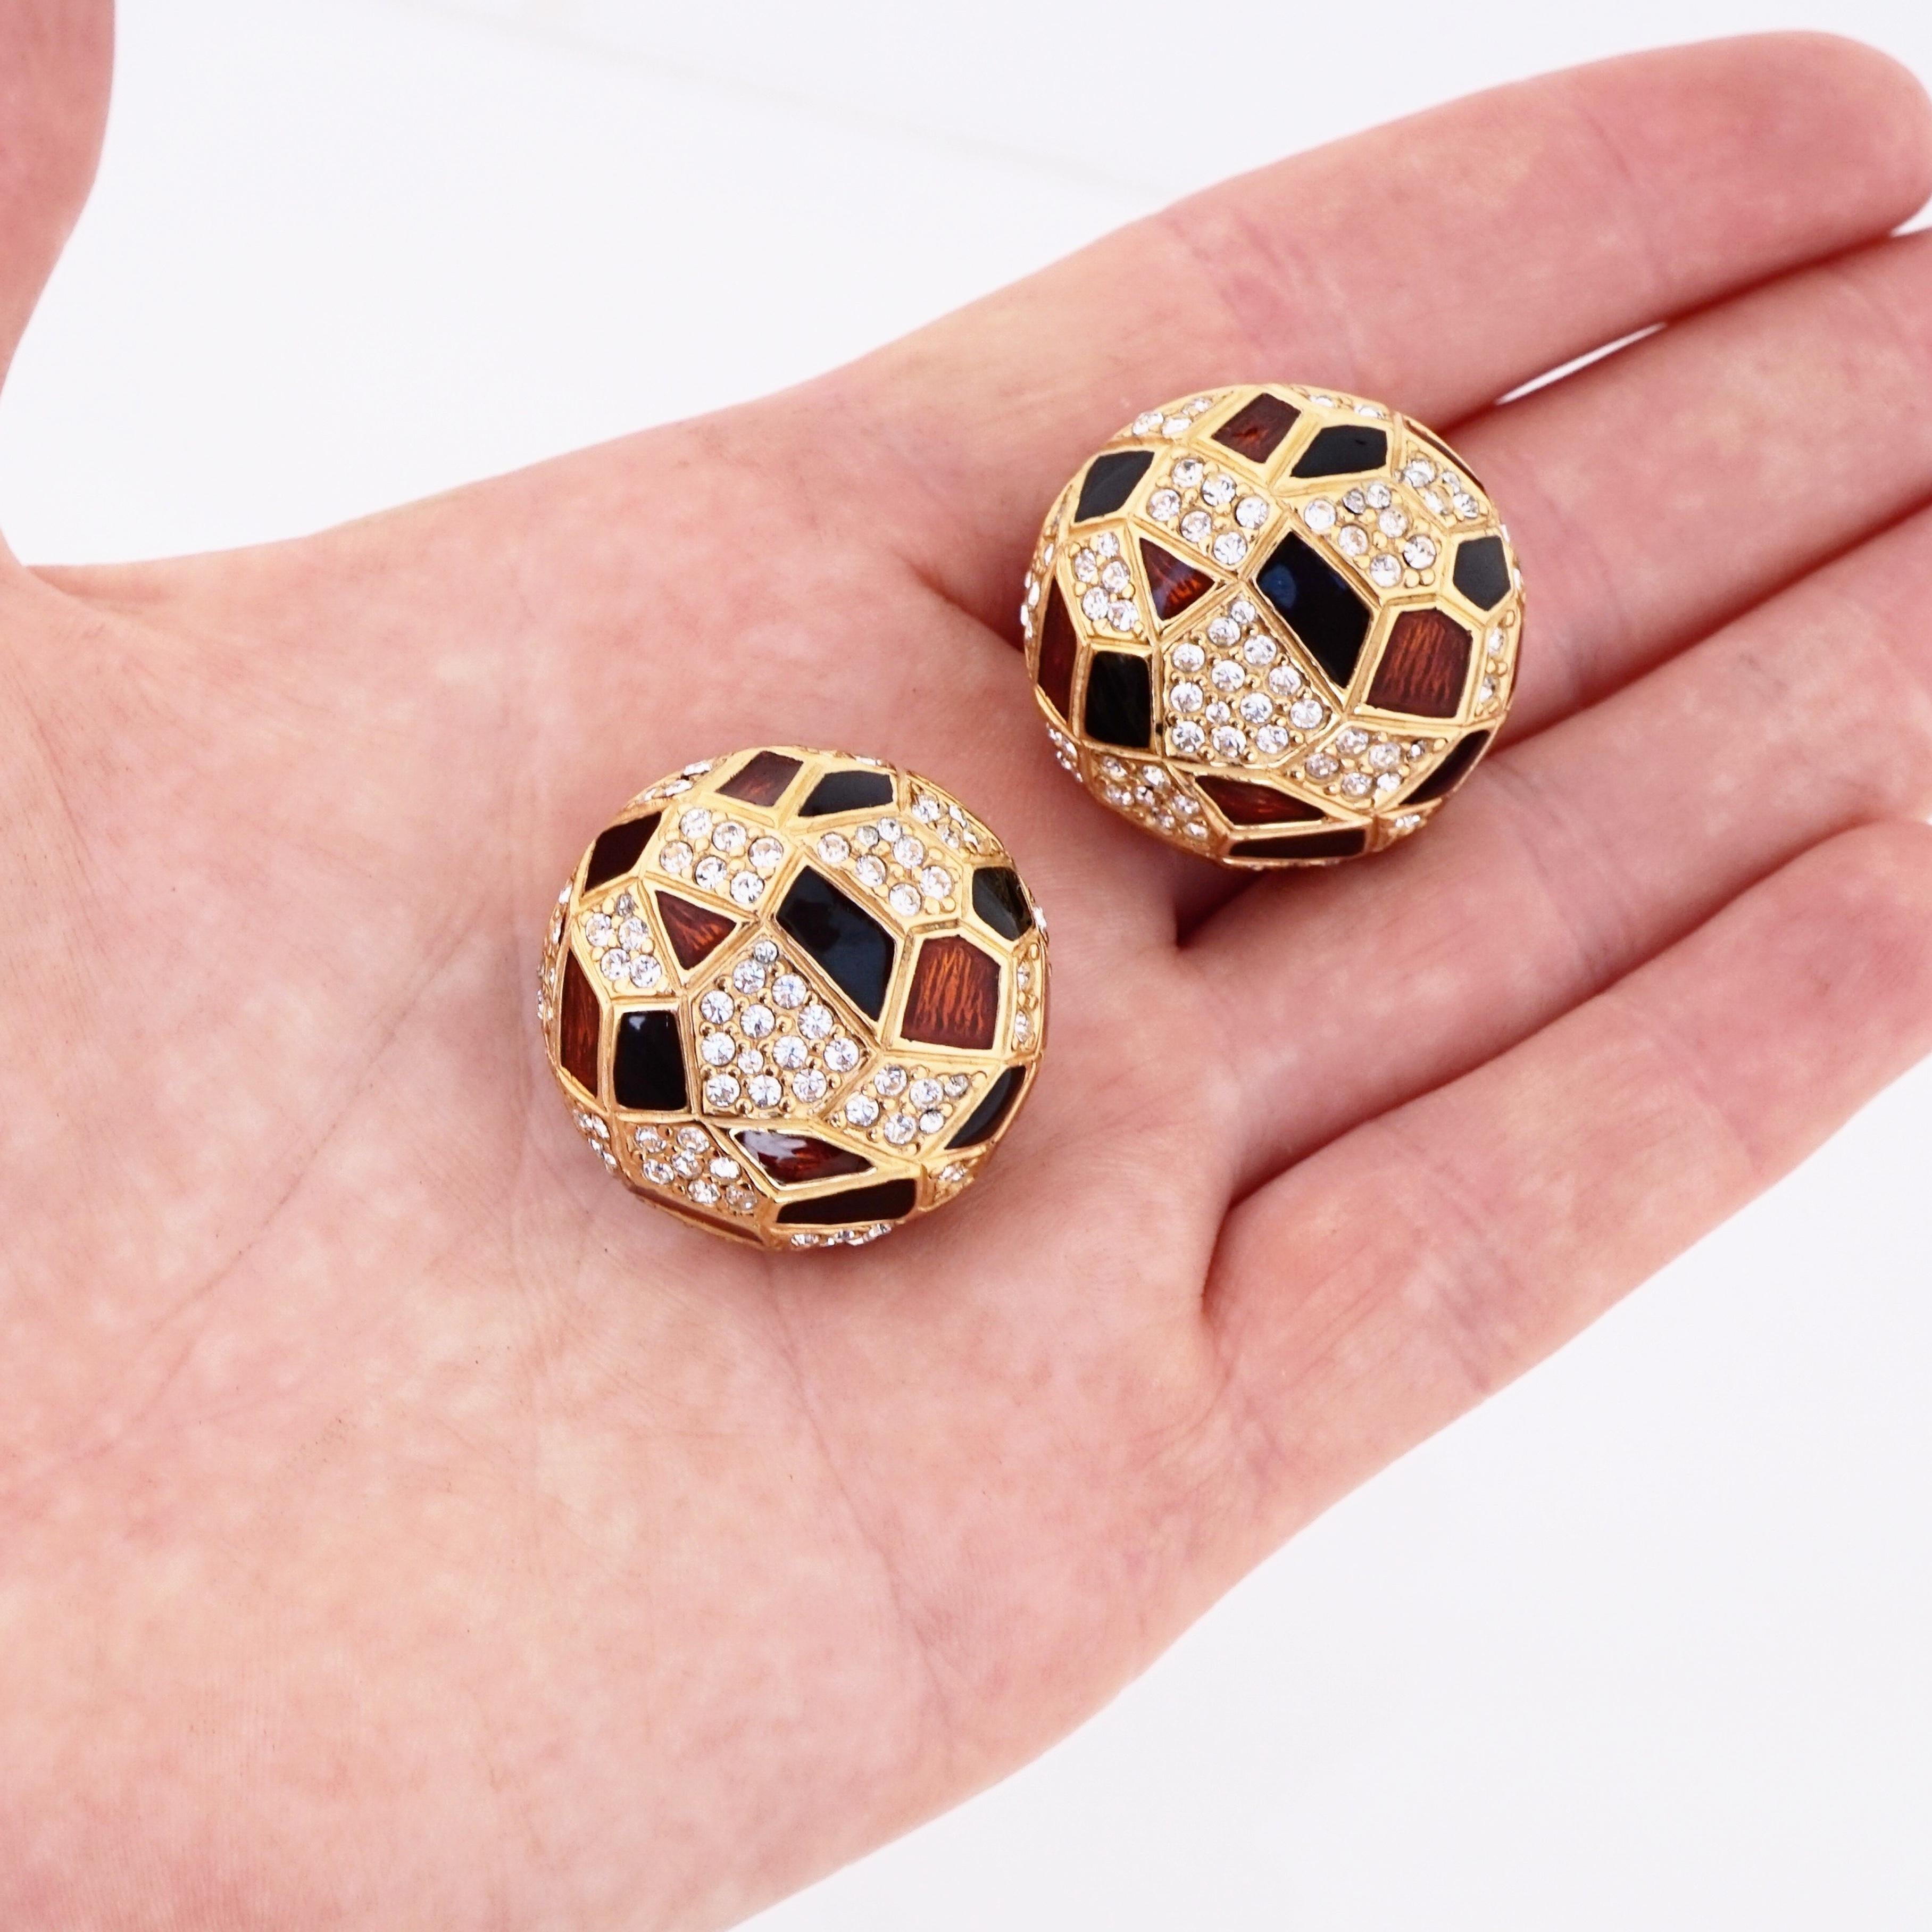 Geometric Enameled Dome Earrings With Crystal Pavé By Ciner, 1980s For Sale 2